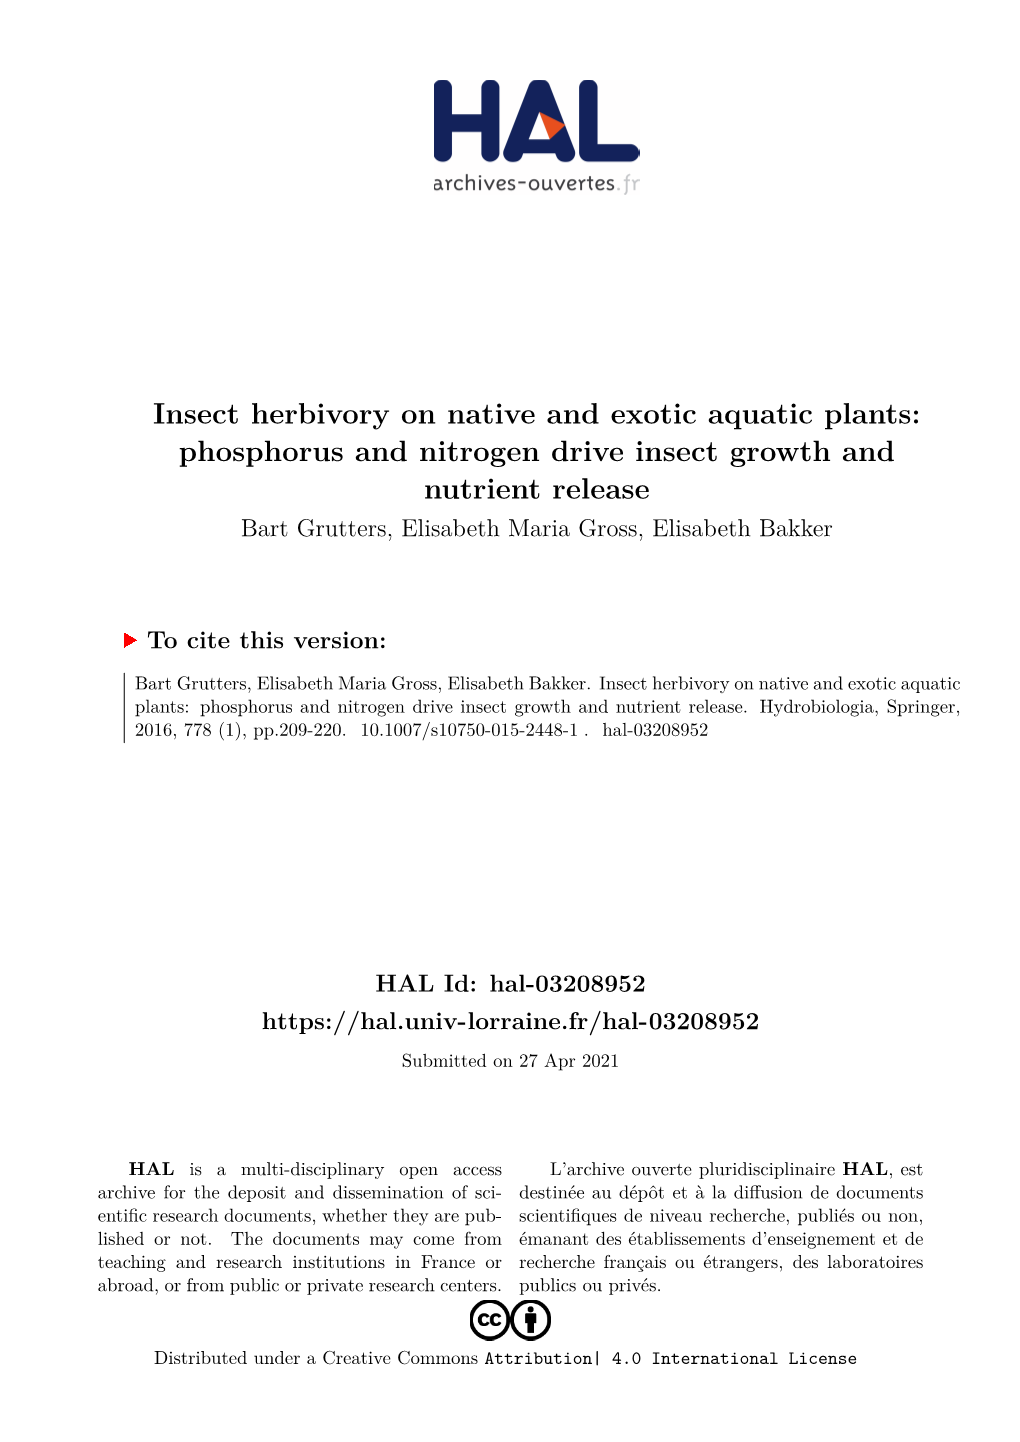 Insect Herbivory on Native and Exotic Aquatic Plants